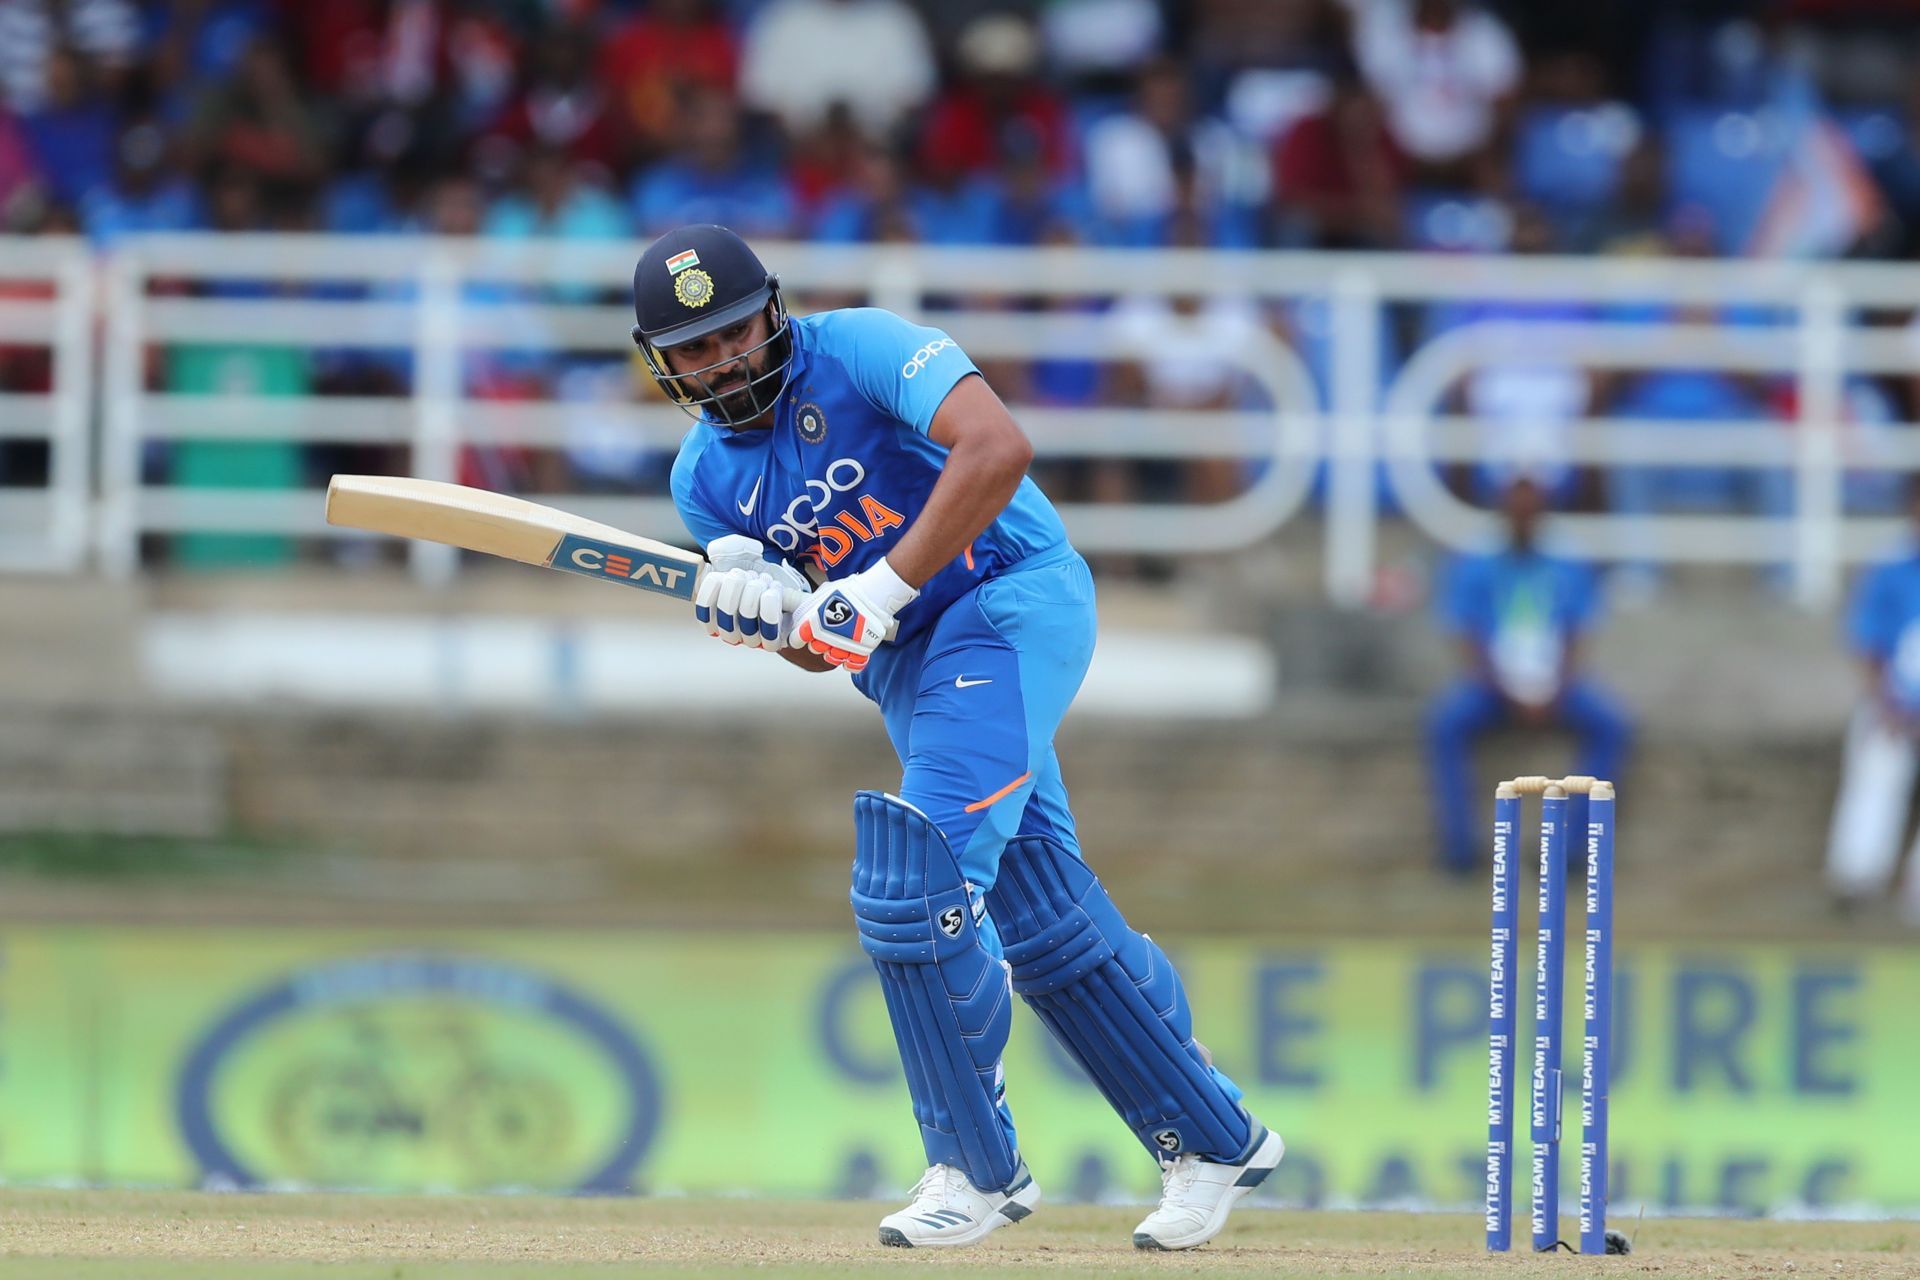 Rohit Sharma has played a number of memorable knocks in the IPL